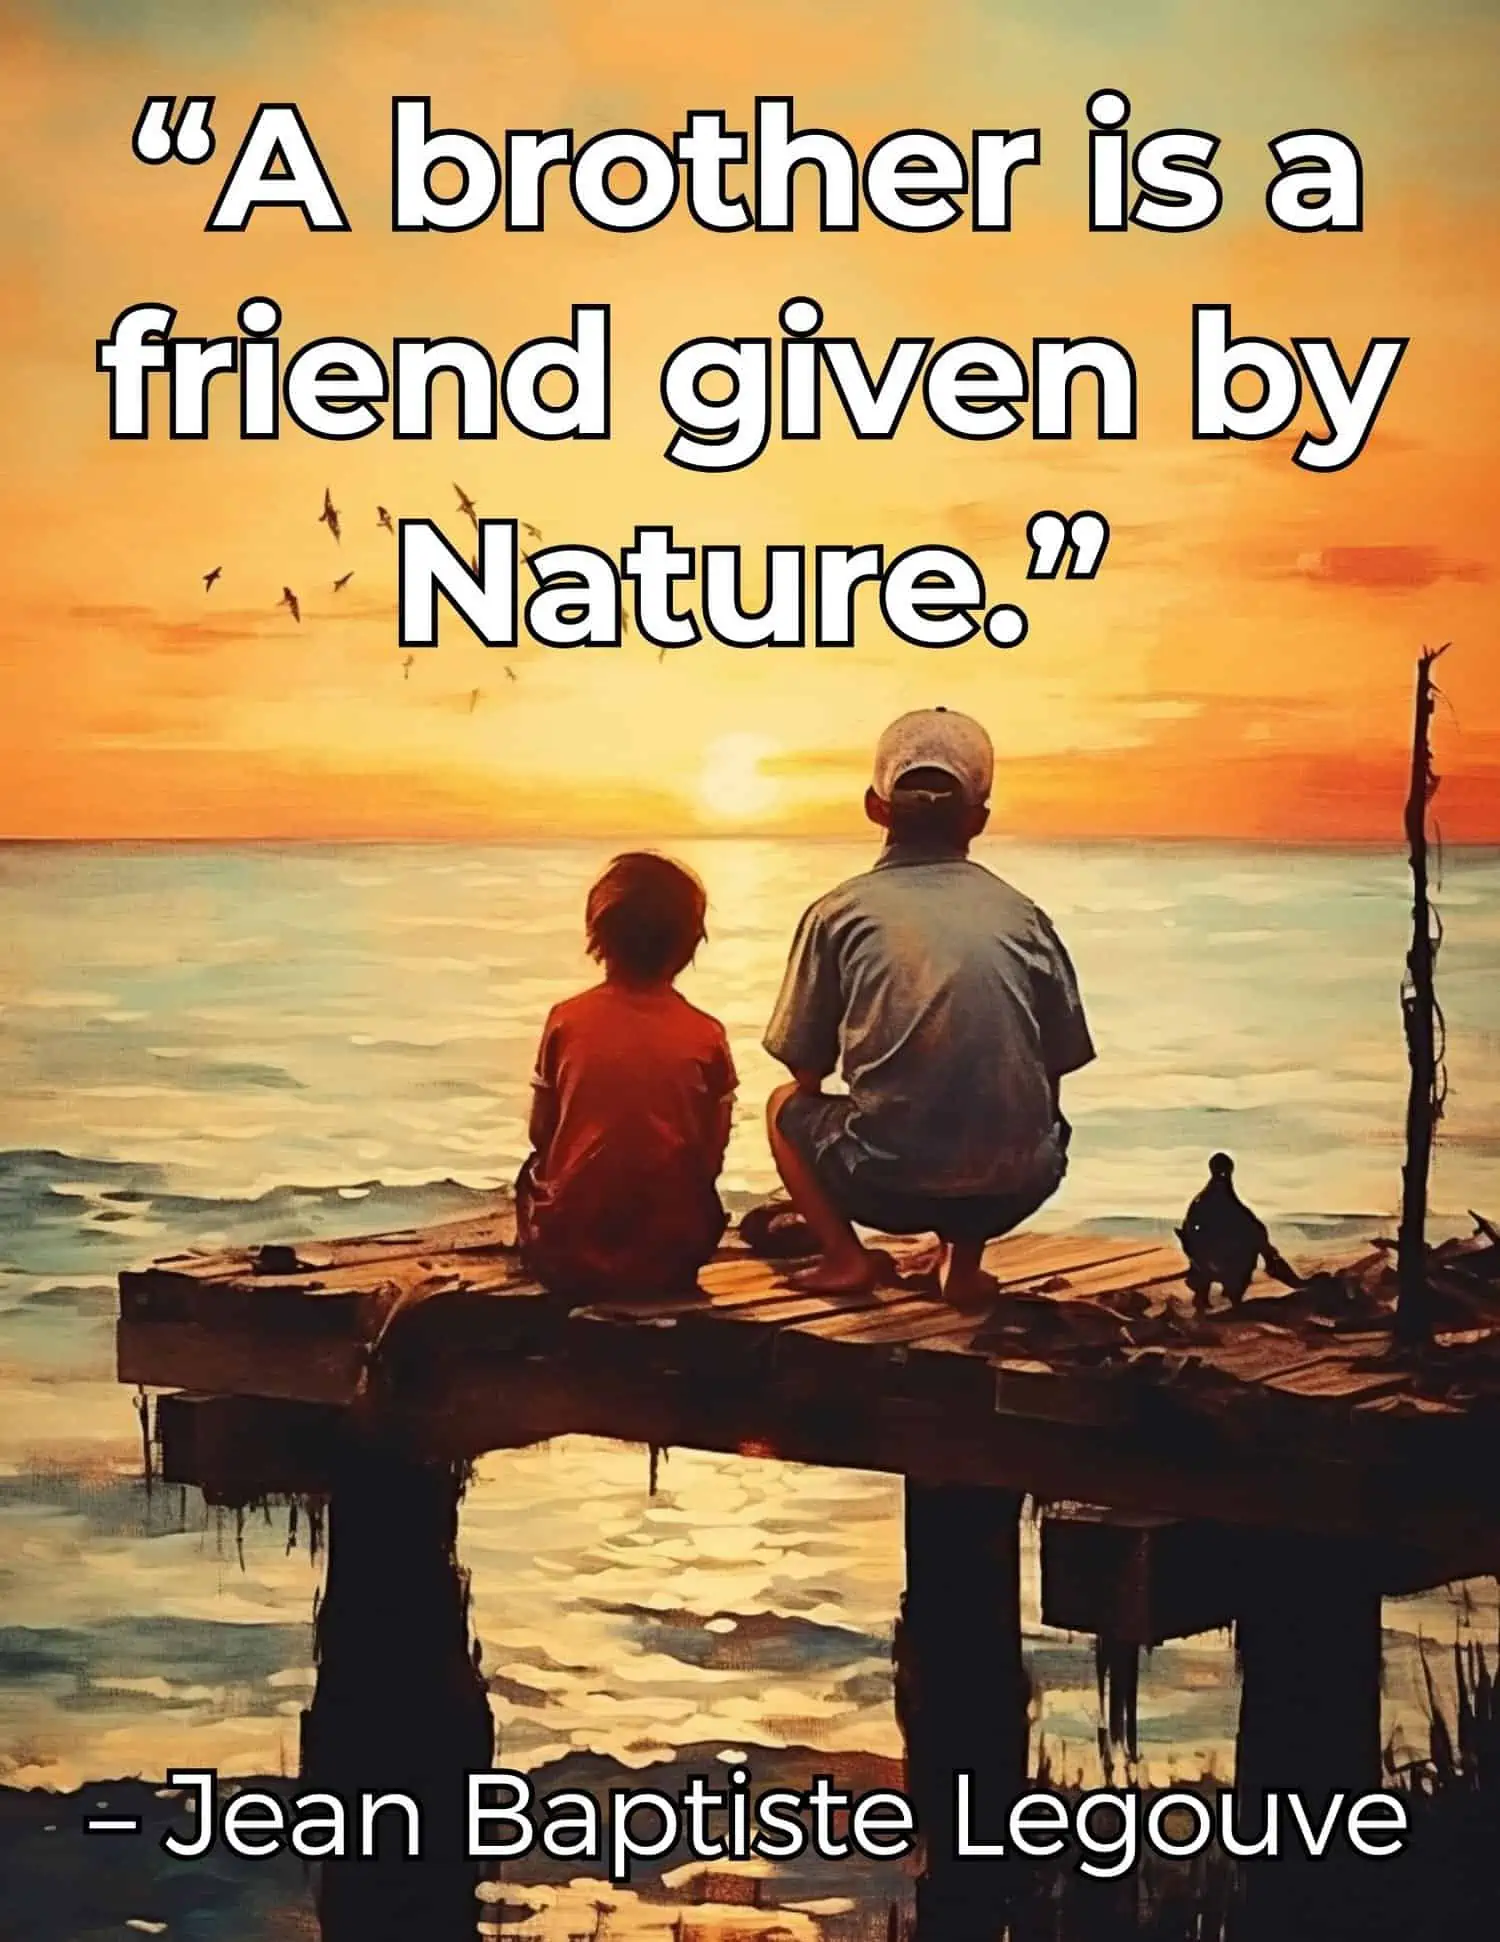 Famous quotes that encapsulate the bond between siblings.